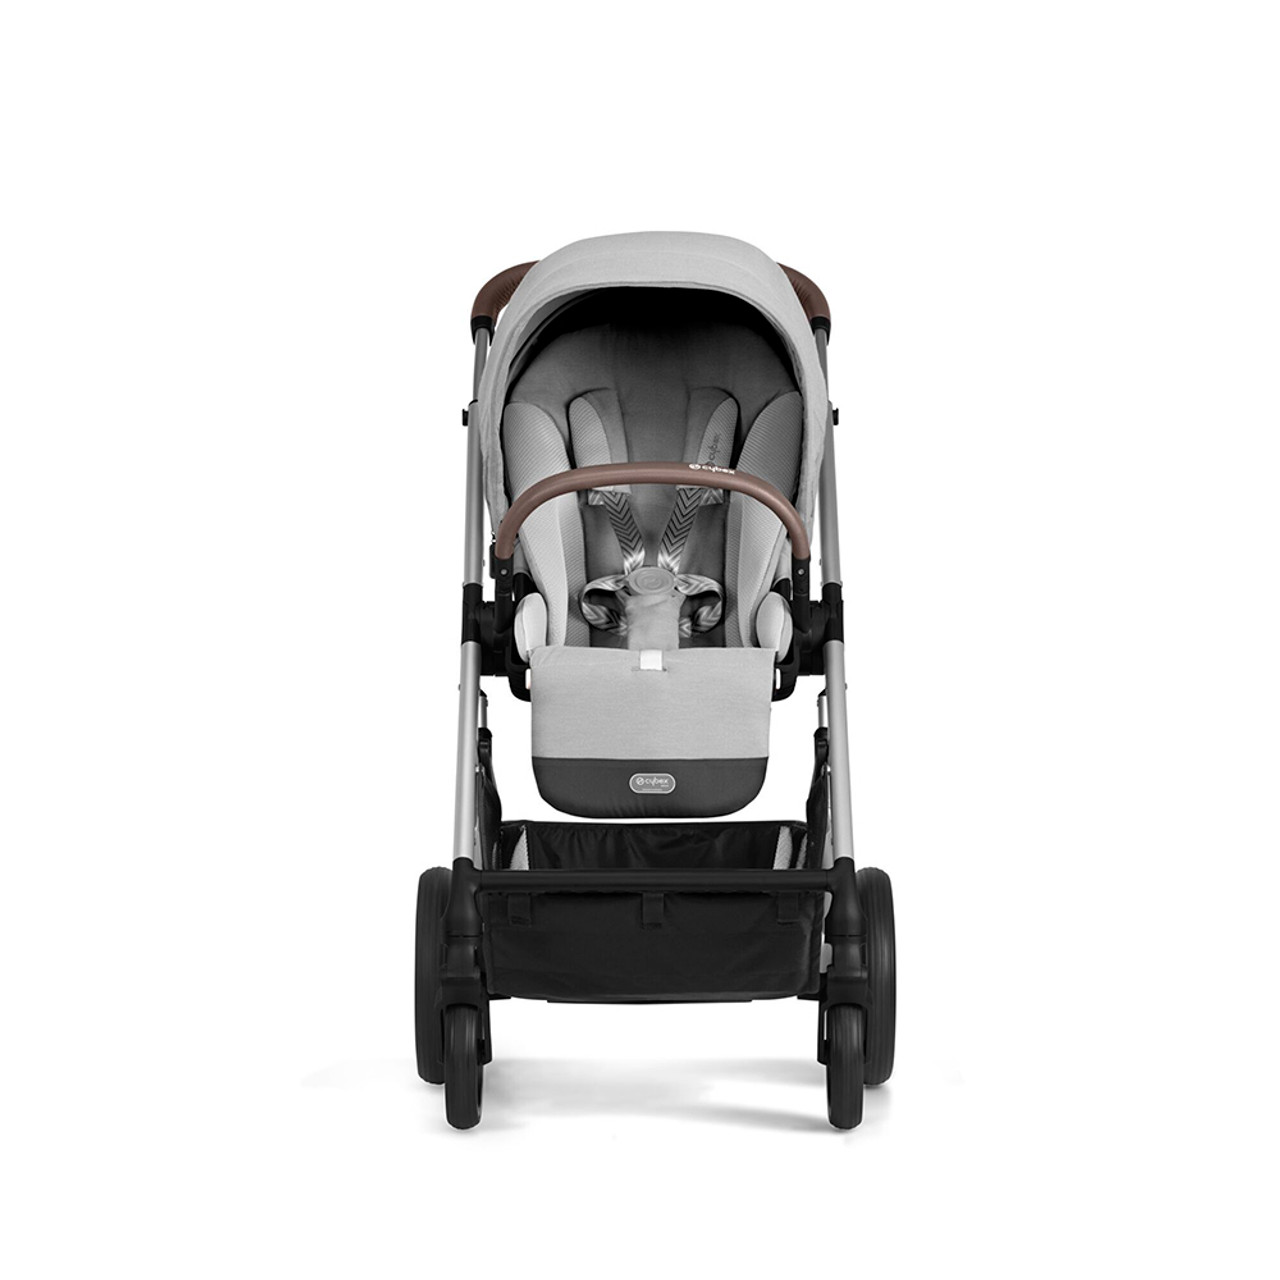 CYBEX BALIOS S LUX - LAVA GREY SILVER CHASSIS